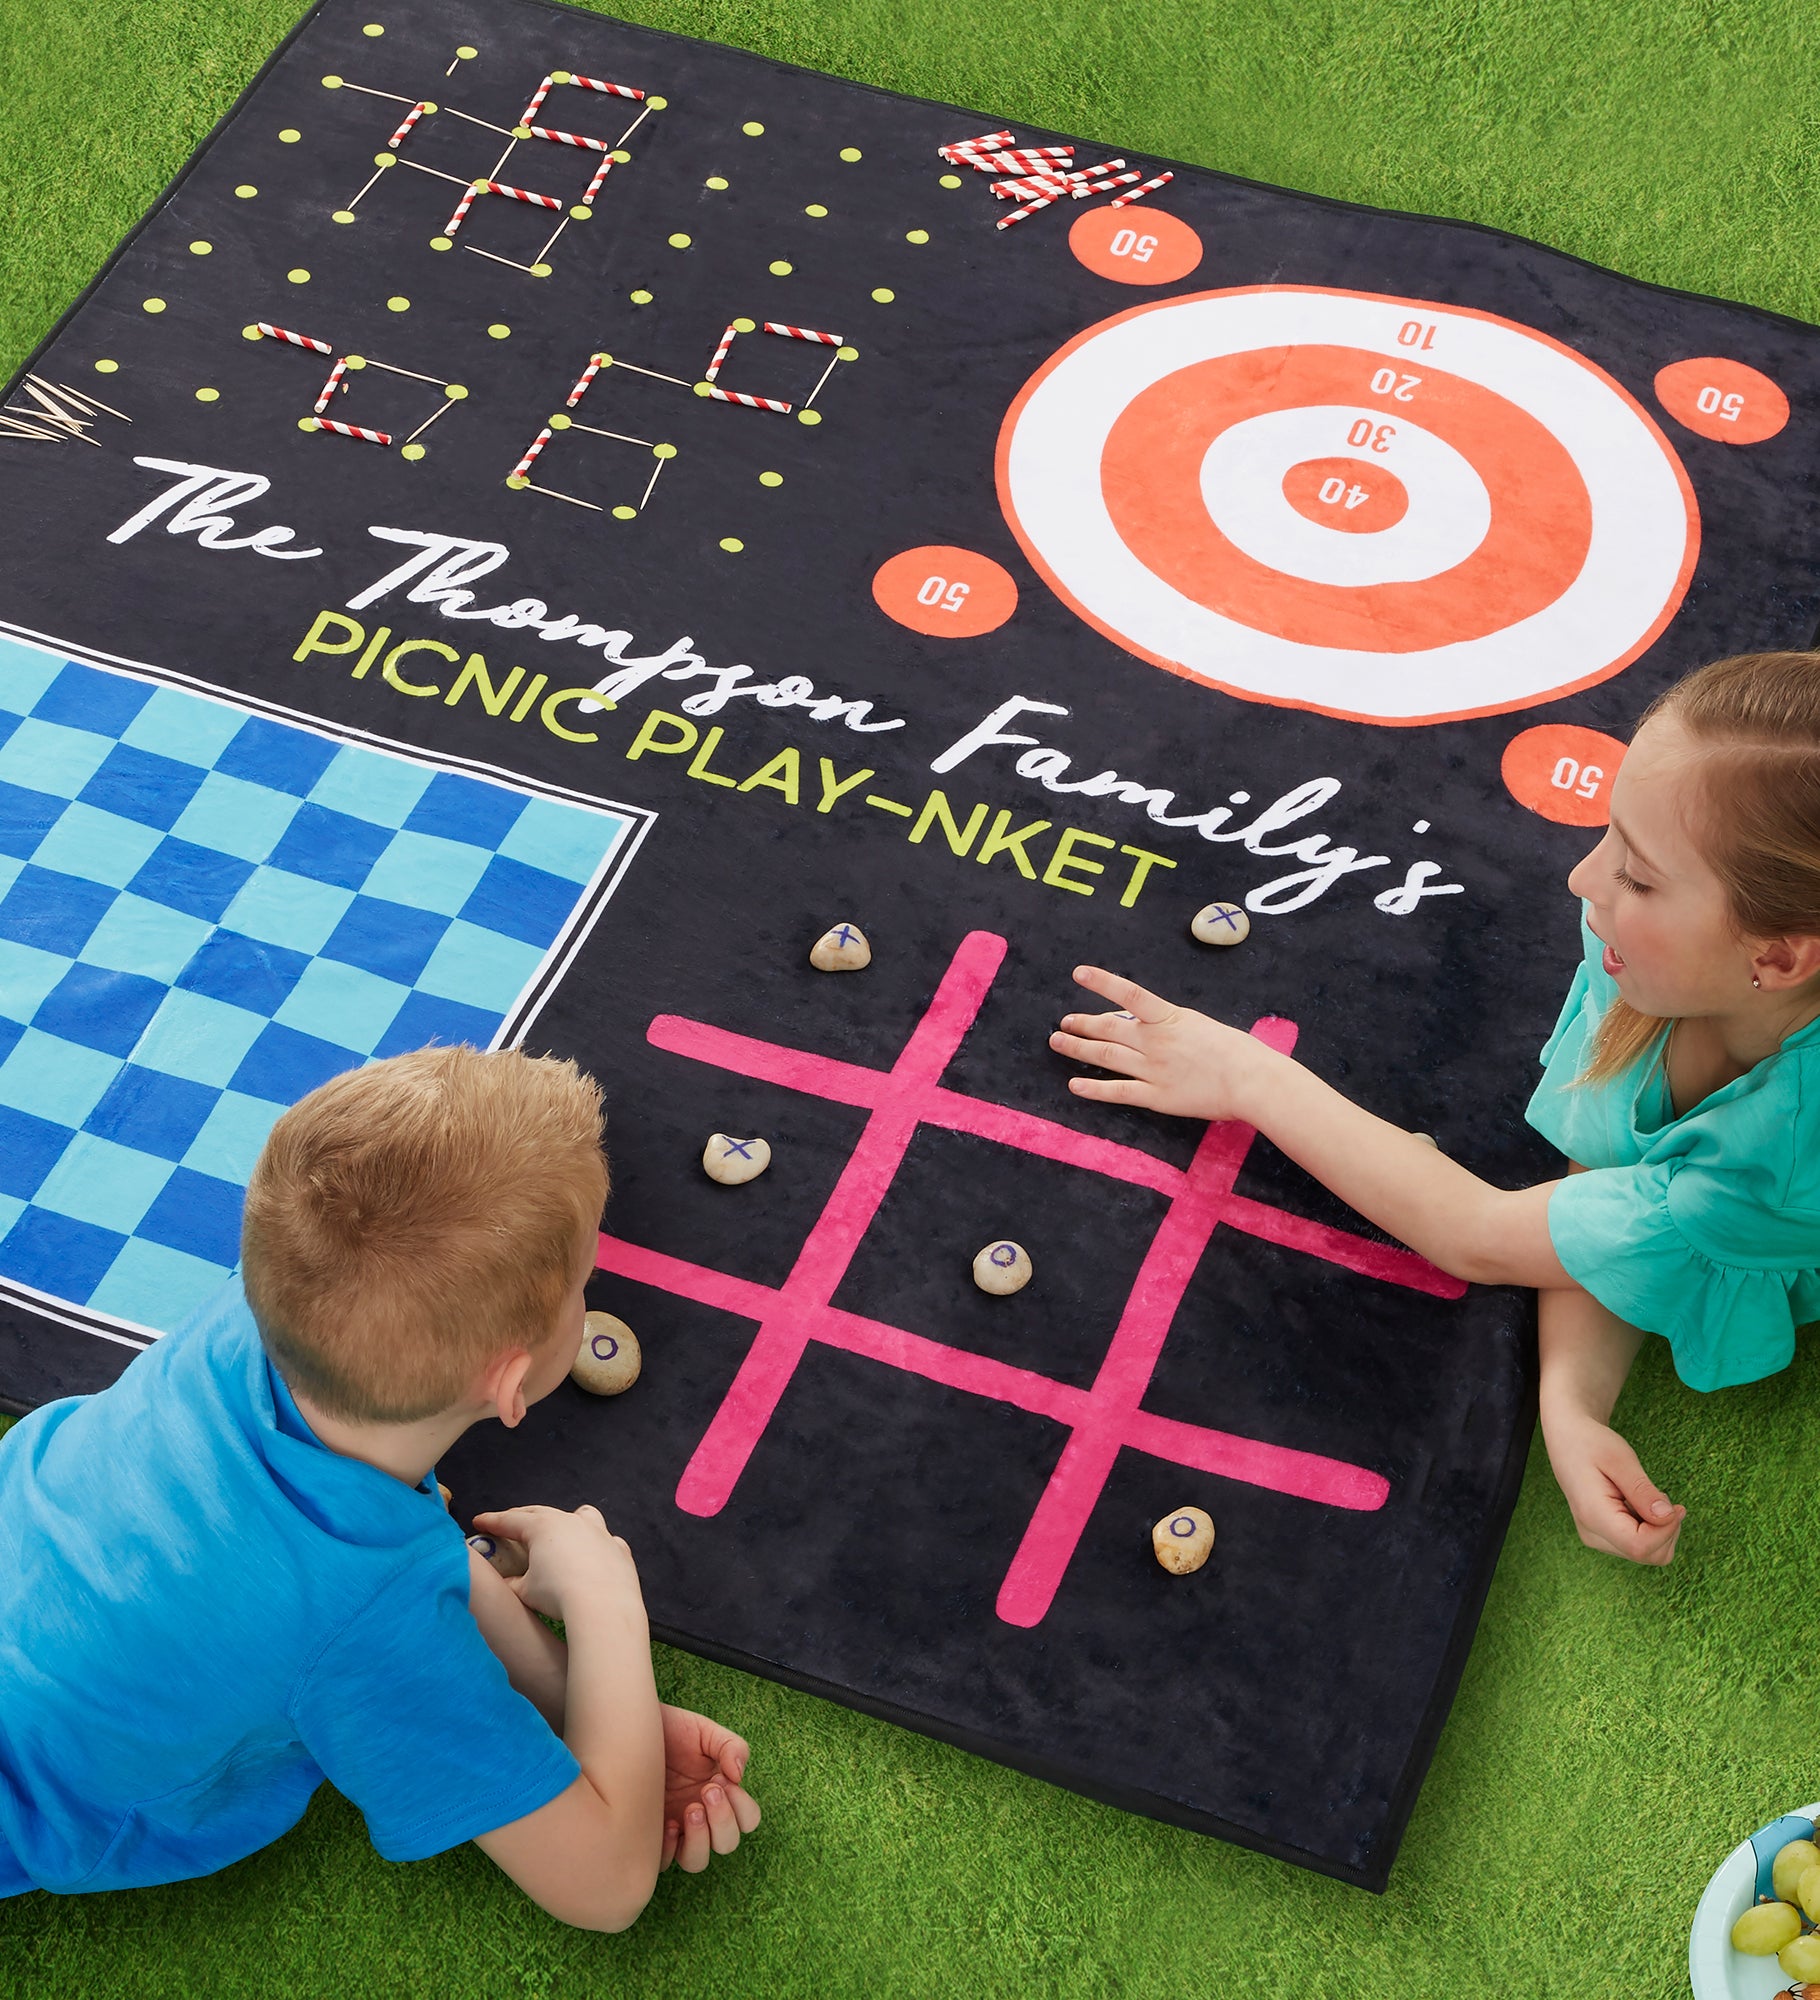 Games Galore Personalized Picnic Blanket